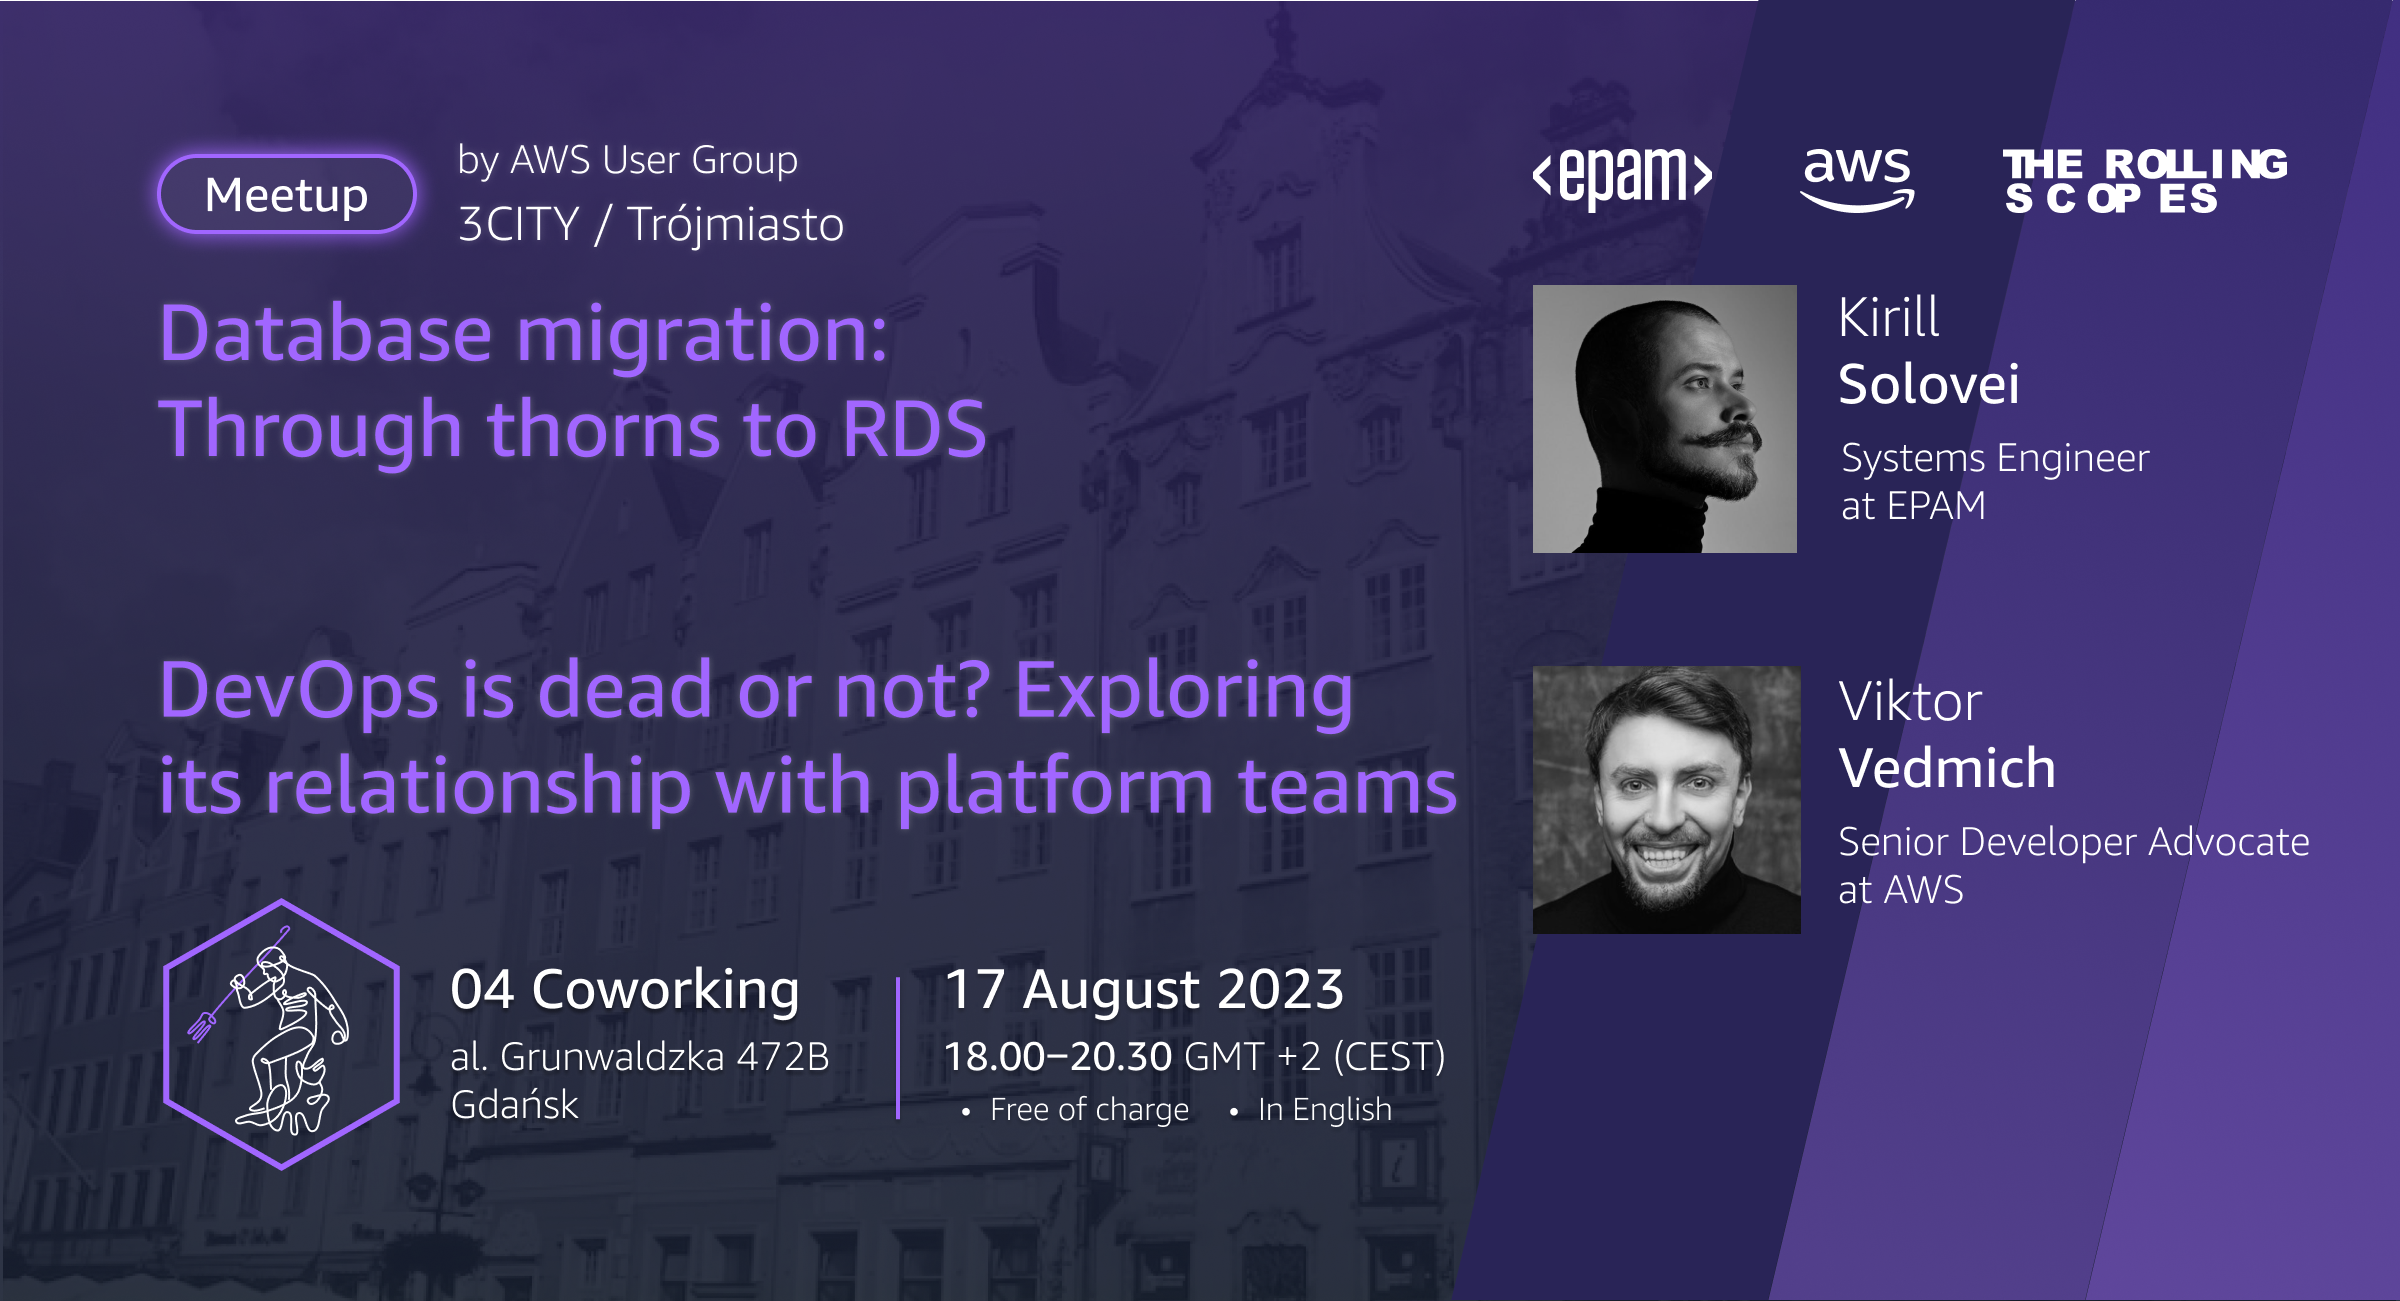 aws-user-group-3city-meetup-2-migration-from-on-prem-to-aws-rds-future-of-platform-engineering